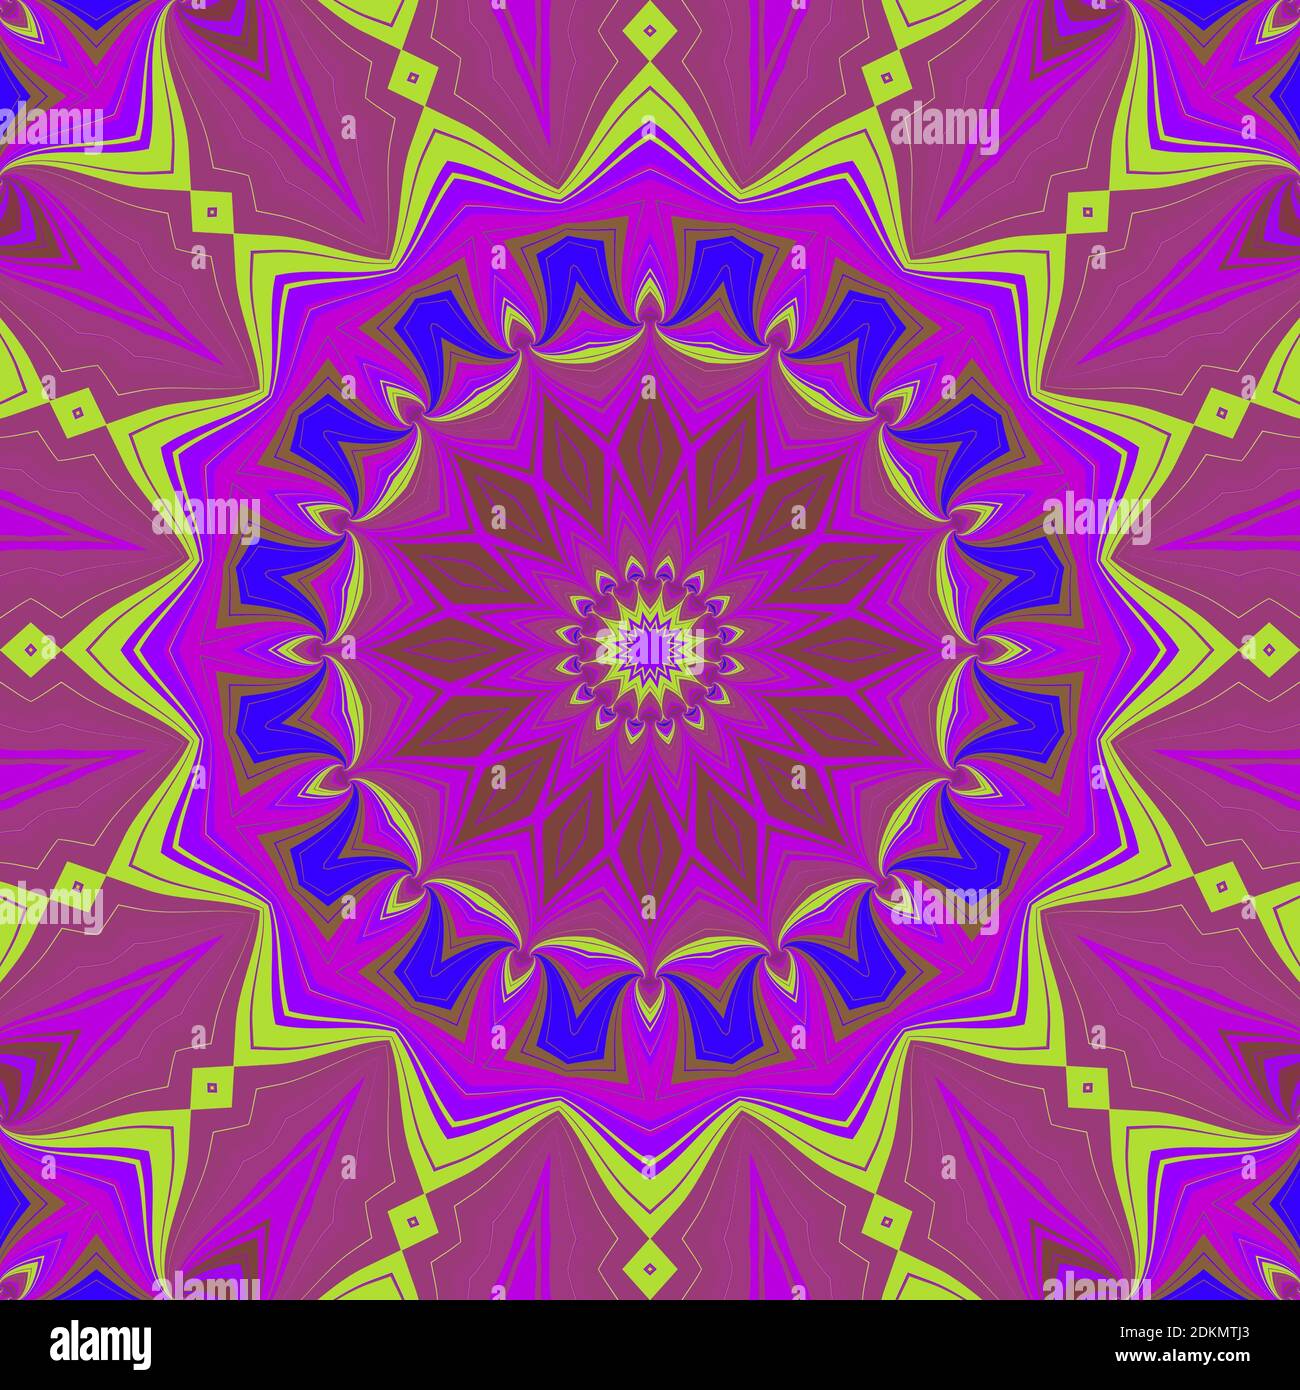 Colorful Mandala background wallpaper illustration. flower shape floral  ornamental design, use it for print, texture, overlay, poster, pattern  Stock Photo - Alamy